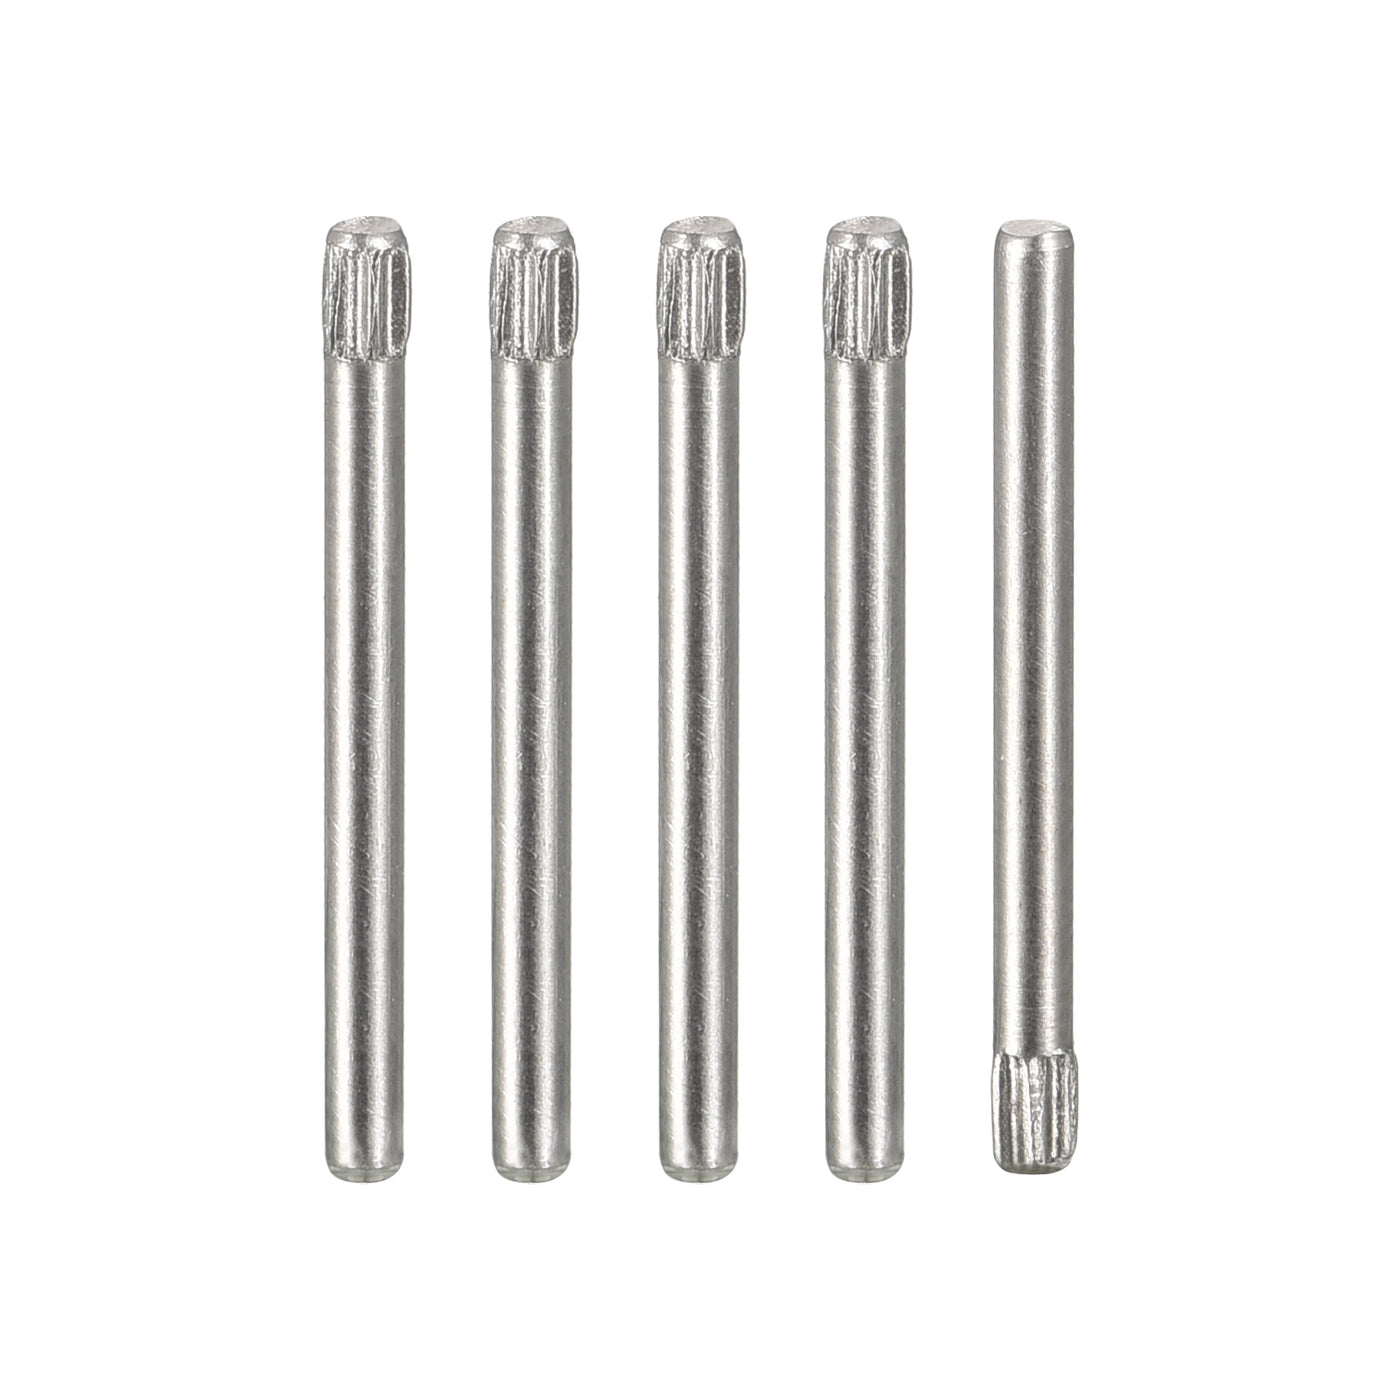 uxcell Uxcell 1.5x18mm 304 Stainless Steel Dowel Pins, 5Pcs Knurled Head Flat End Dowel Pin